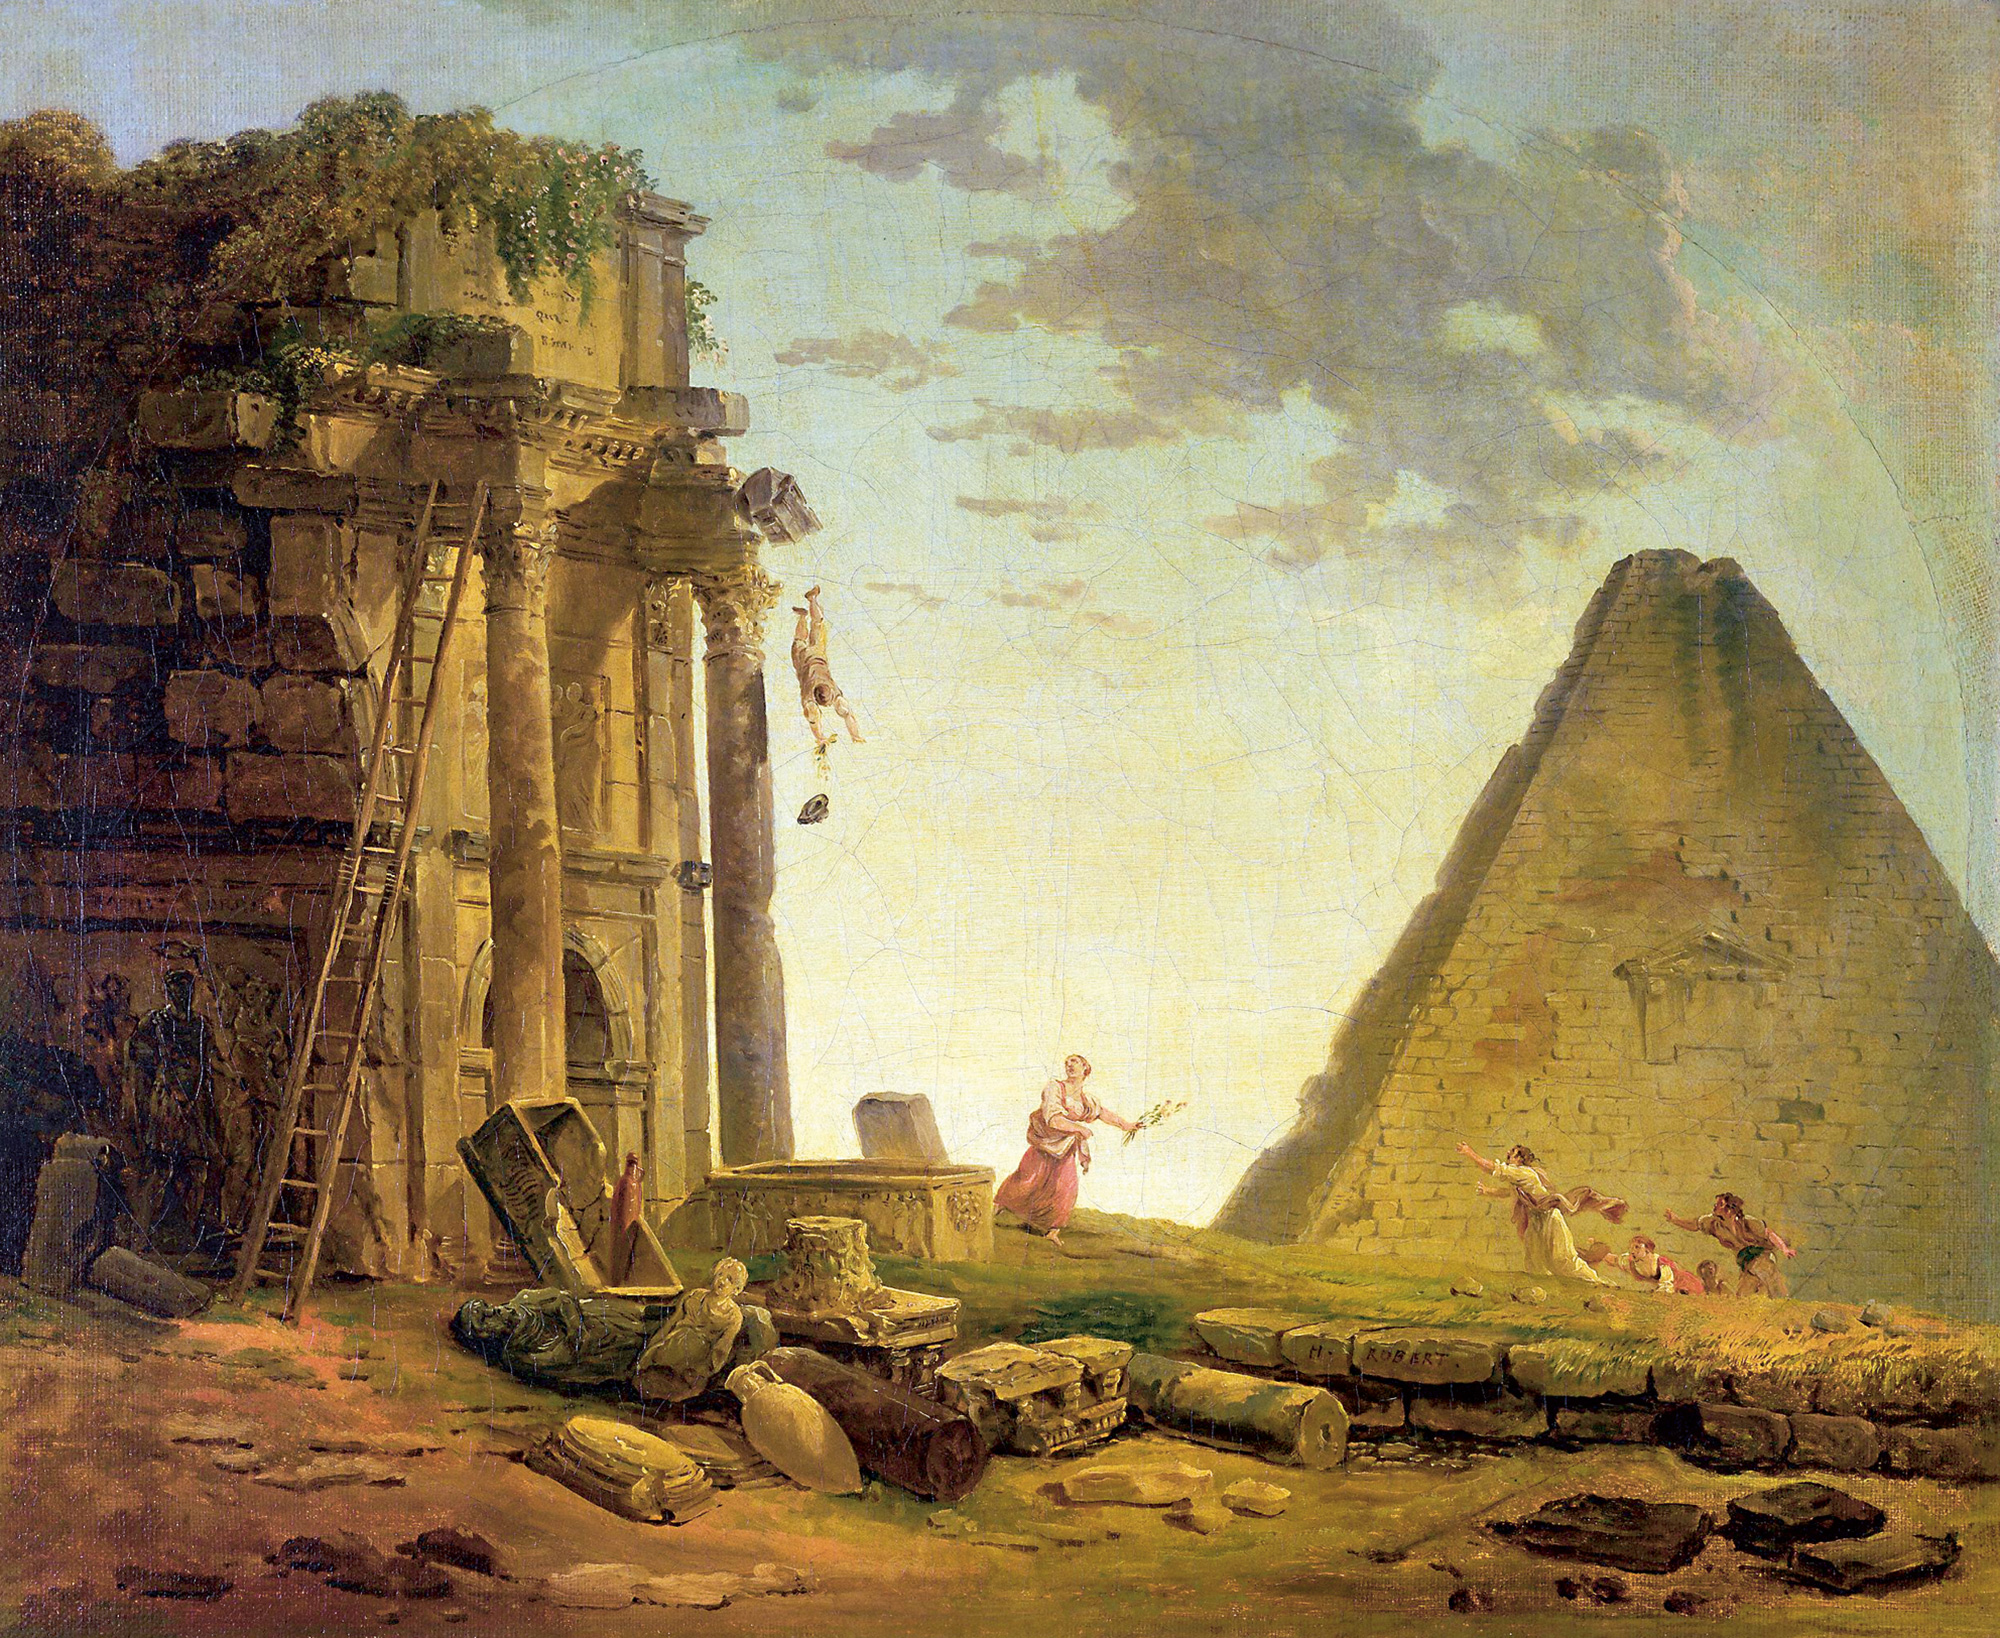 A circa seventeen ninety to eighteen oh four painting by Hubert Robert titled “The Accident” of a man falling headlong from an ancient structure.